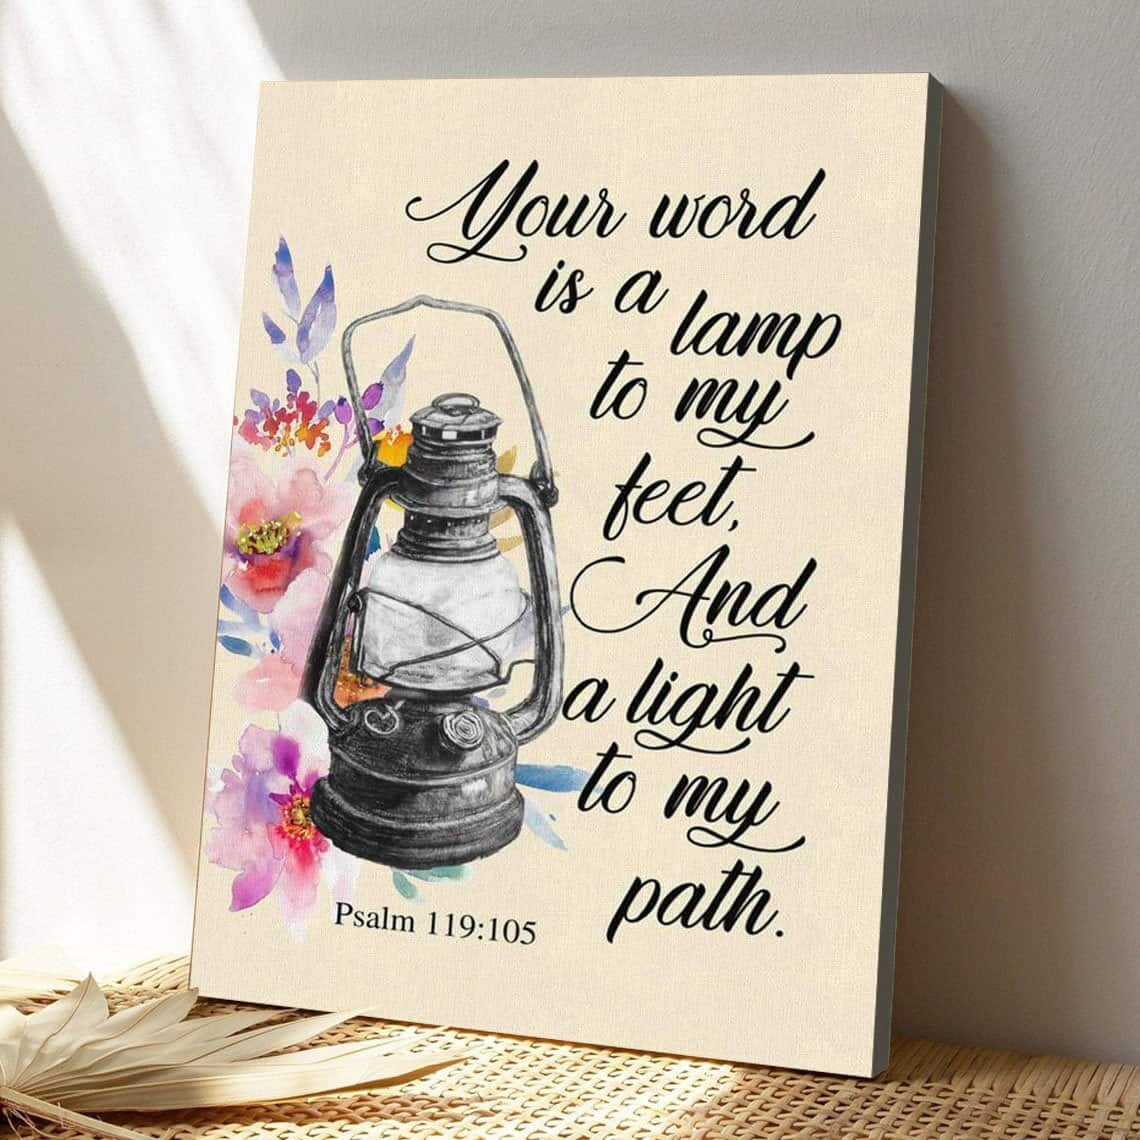 Bible Verse Your Word Is A Lamp To My Feet Psalm 119105 Bible Verse Jesus Christ Canvas Print